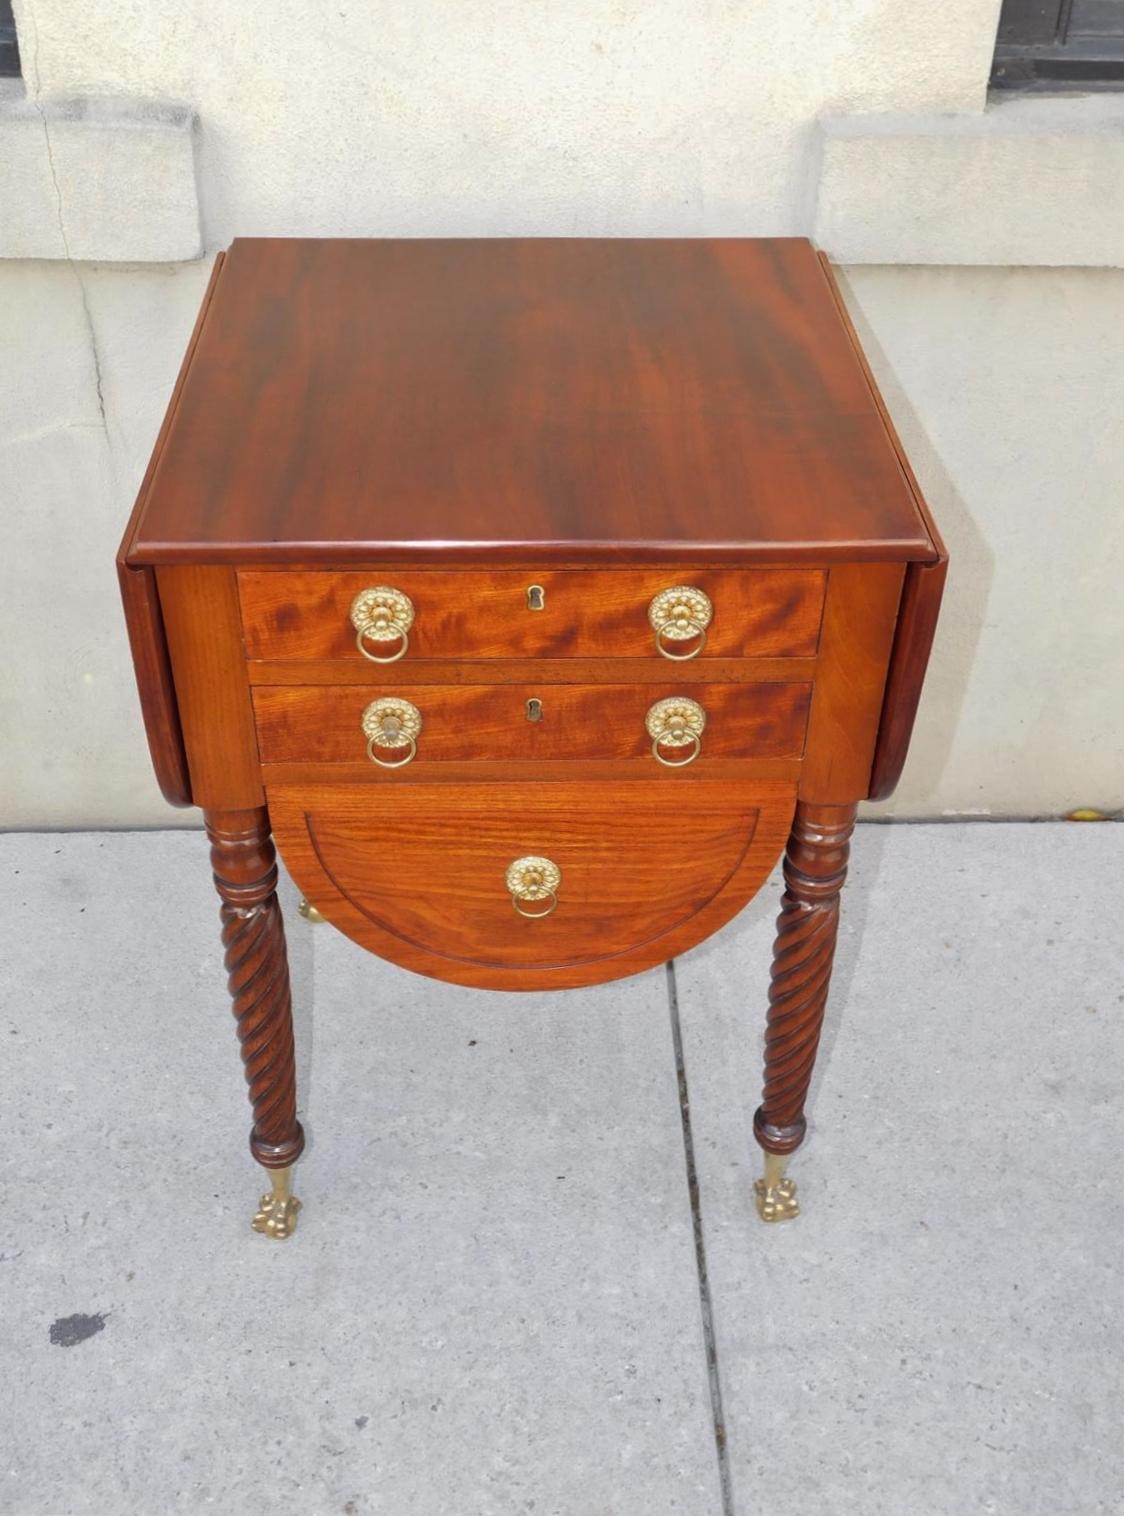 American Federal Mahogany drop leaf three drawer work table with incised carvings, original circular foliage brasses, key hole escutcheons, and resting on bulbous ringed barley twist legs with the original tapered brass claw and ball feet, Early